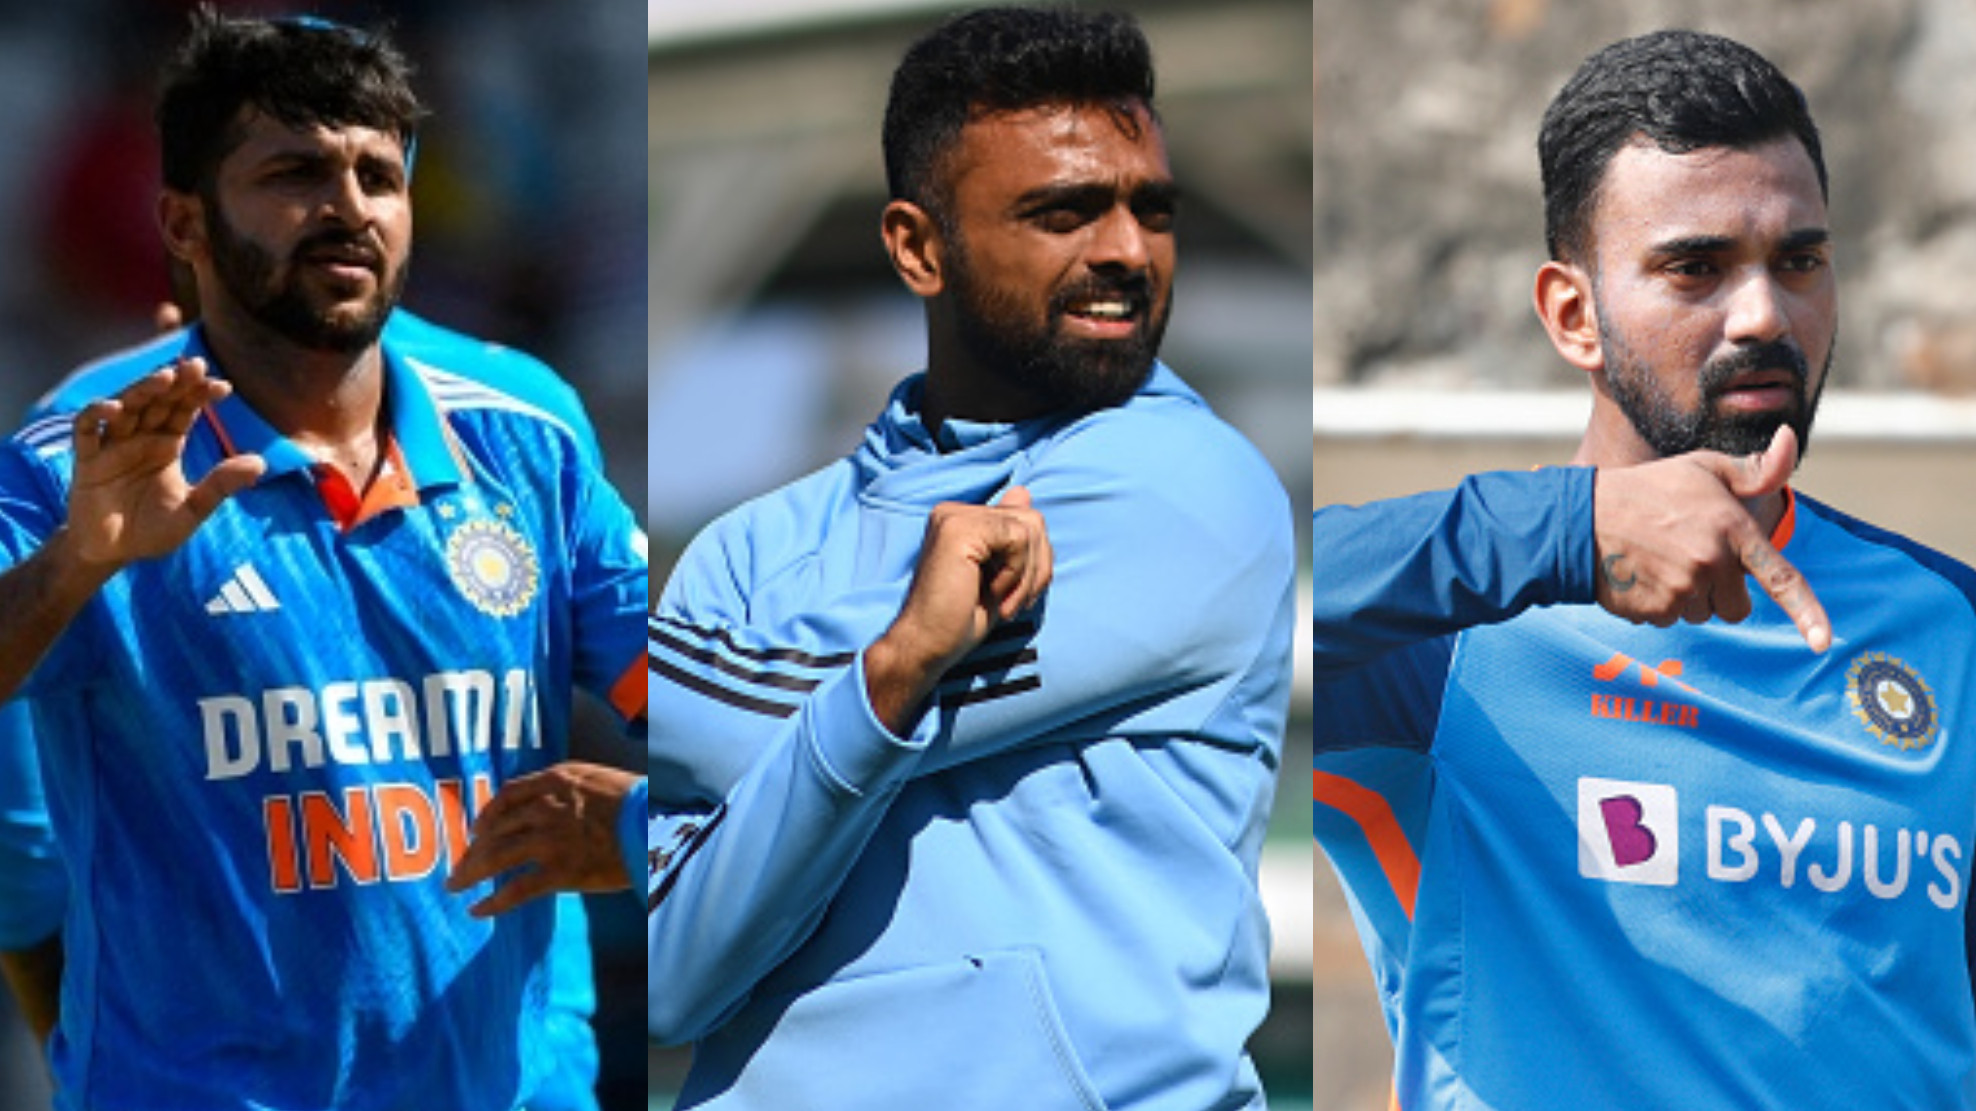 CWC 2023: Shardul Thakur, Jaydev Unadkat vying for 4th pacer slot; selectors want fully-fit KL Rahul- Report